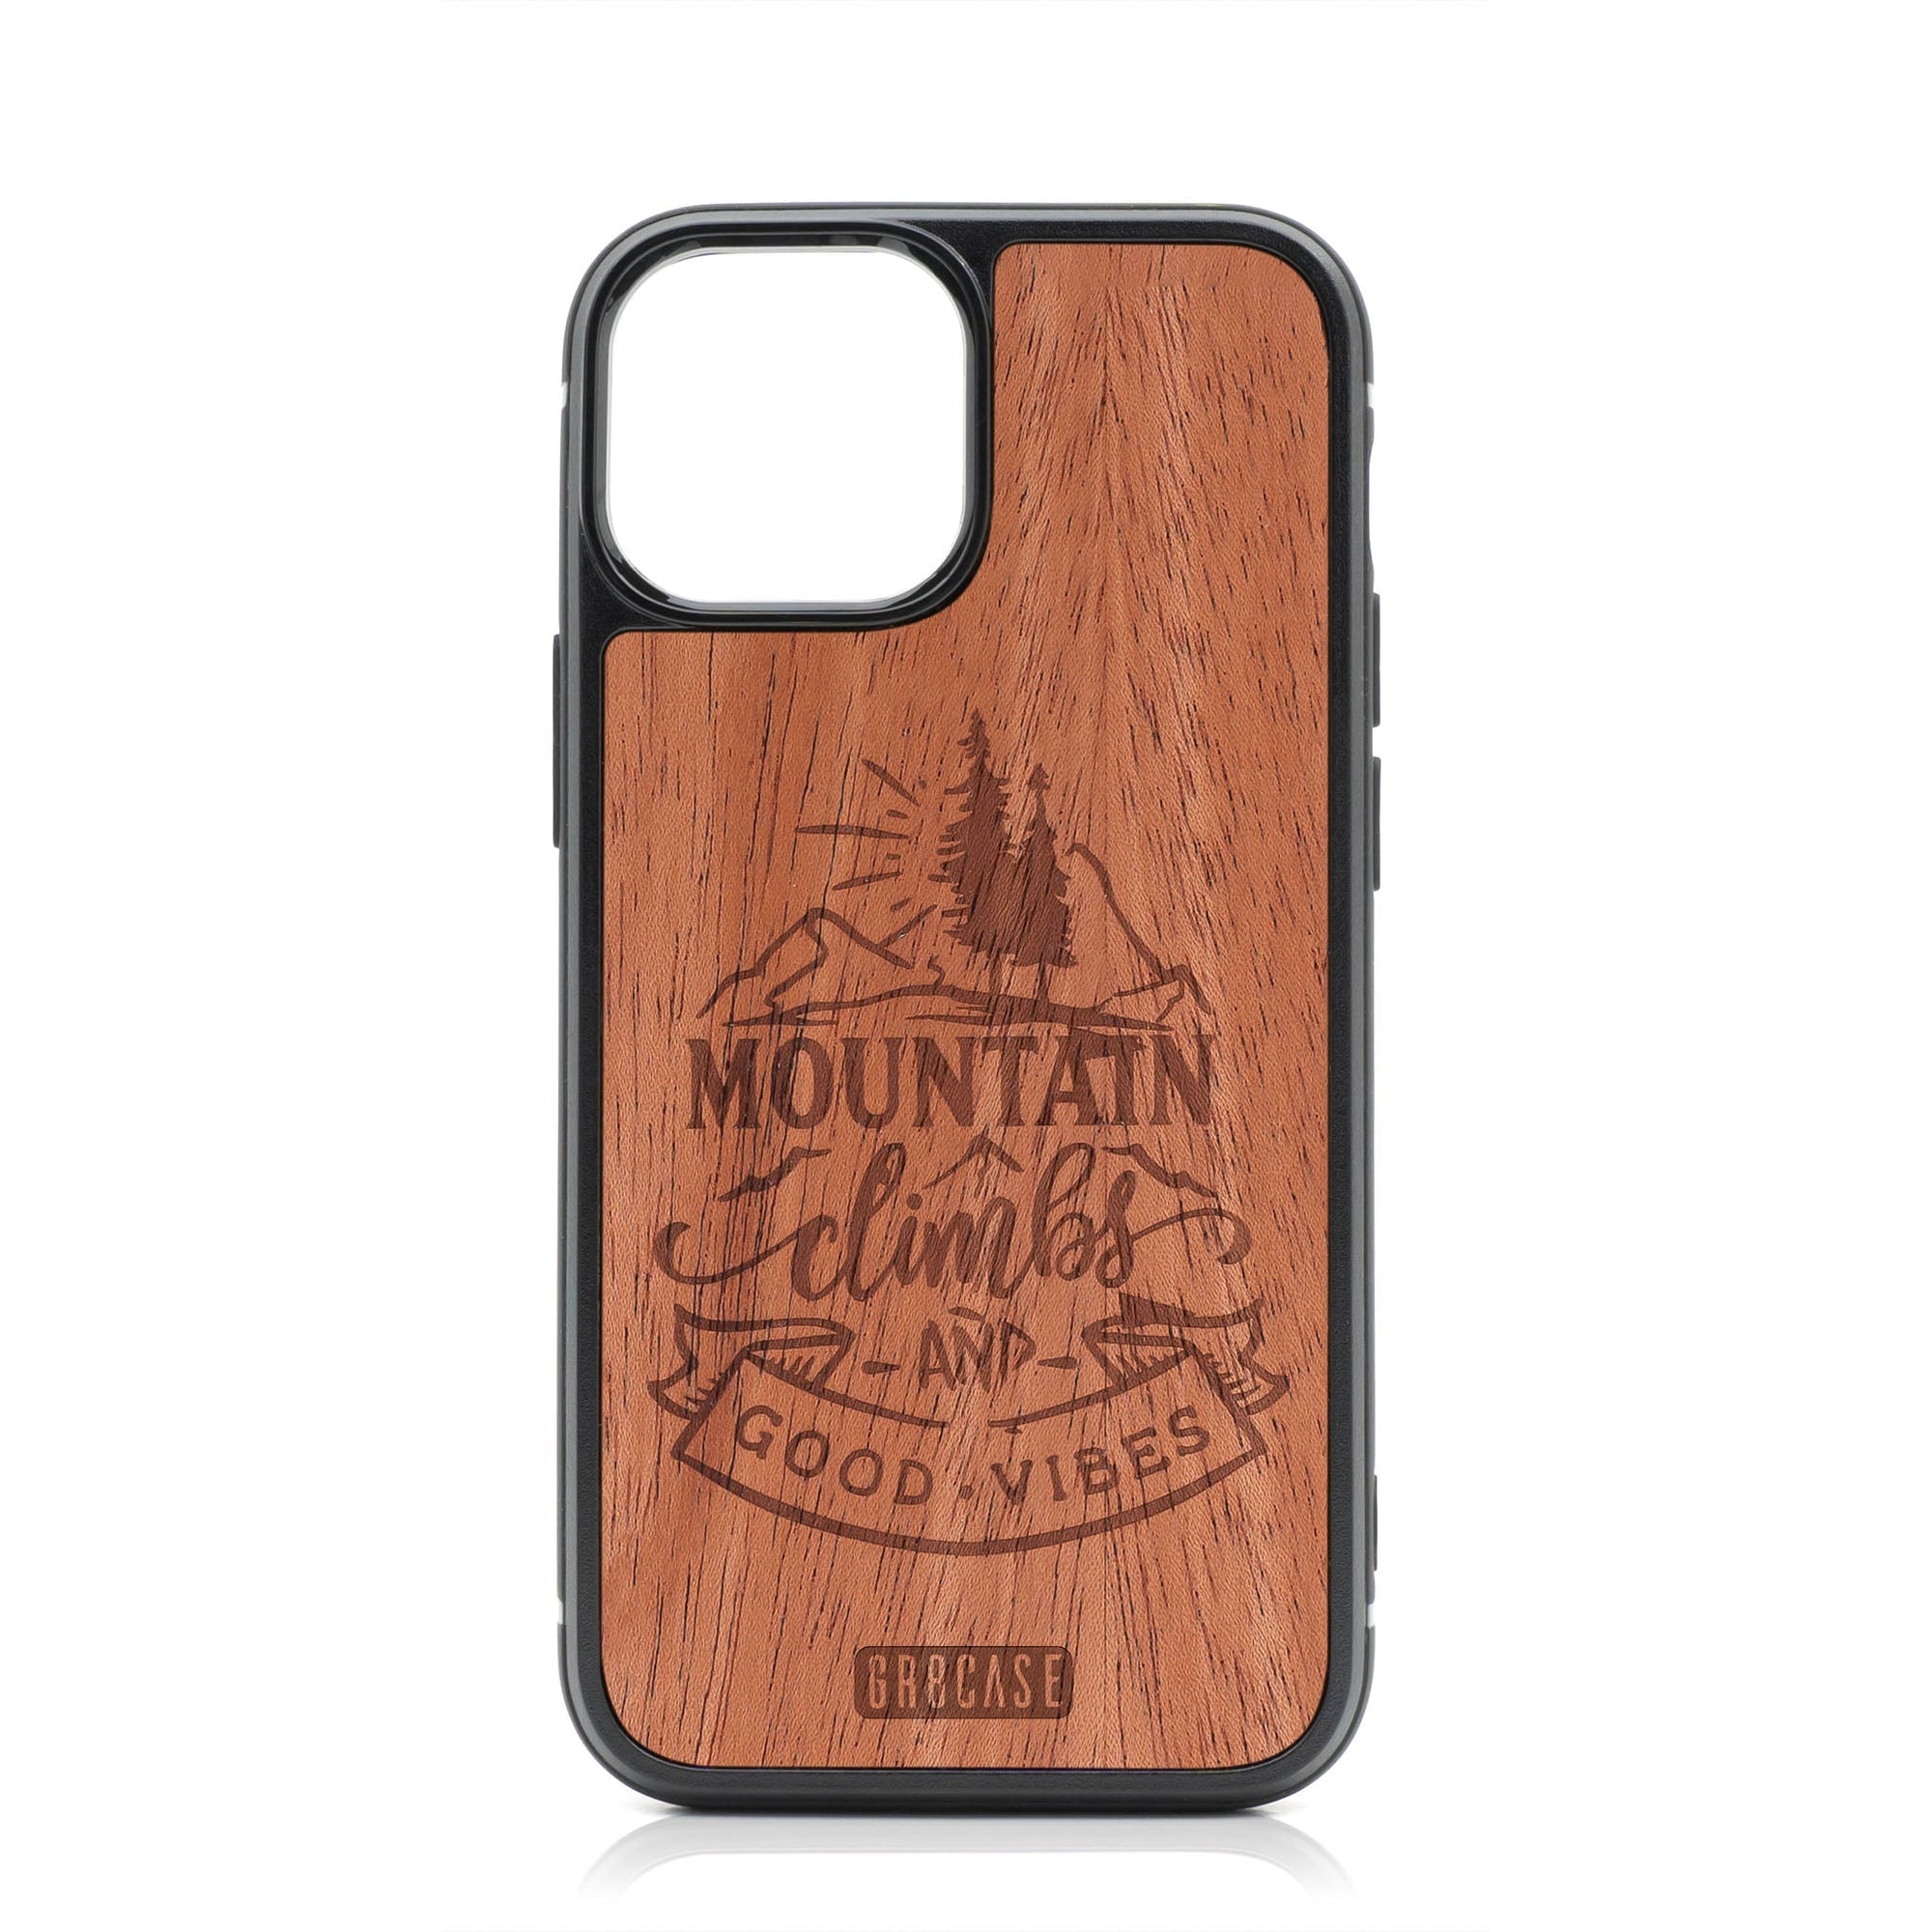 Mountain Climb Good Vibes Design Wood Case For iPhone 14 Plus